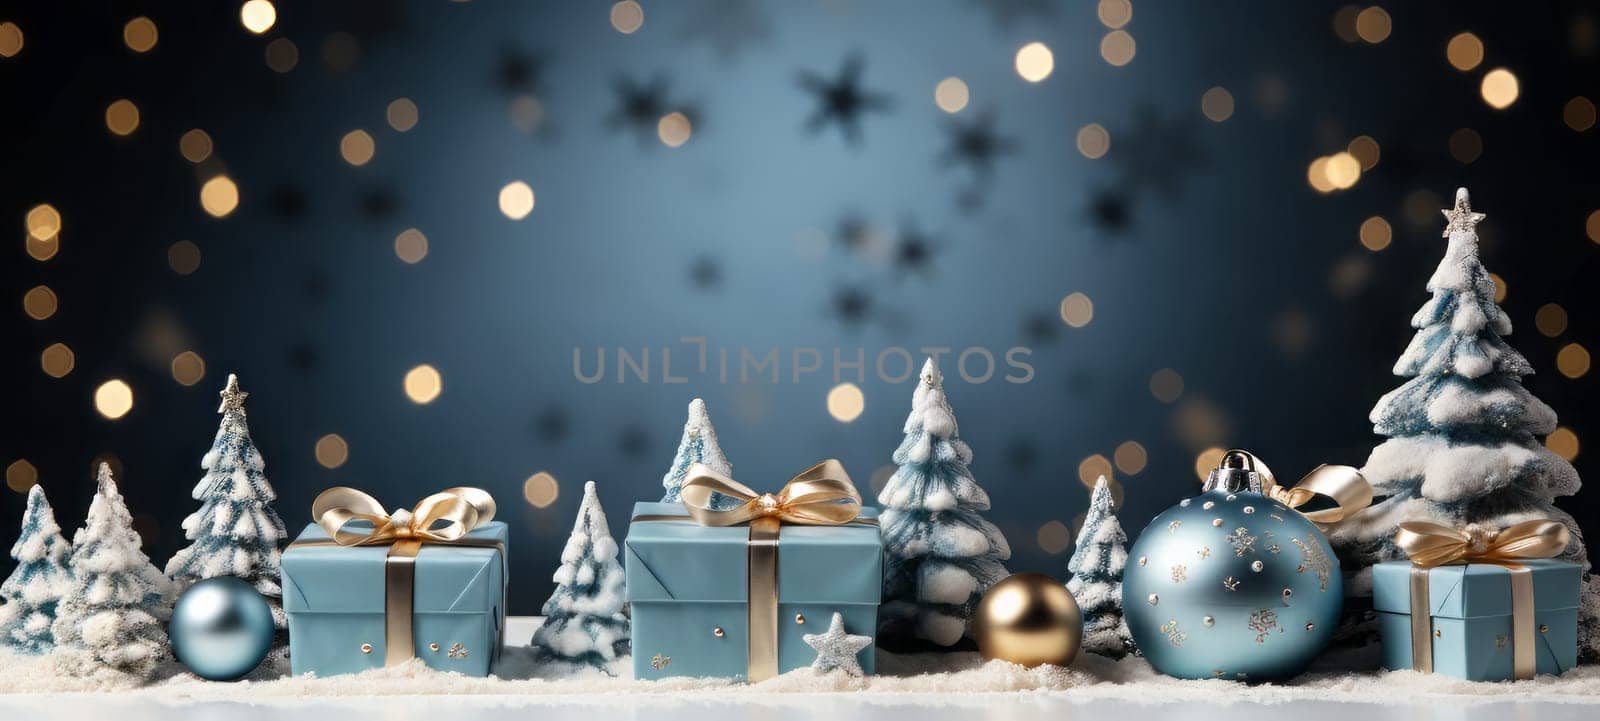 Christmas and New Year background - gift boxes, Christmas trees and toys on a background of bokeh garlands by NataliPopova